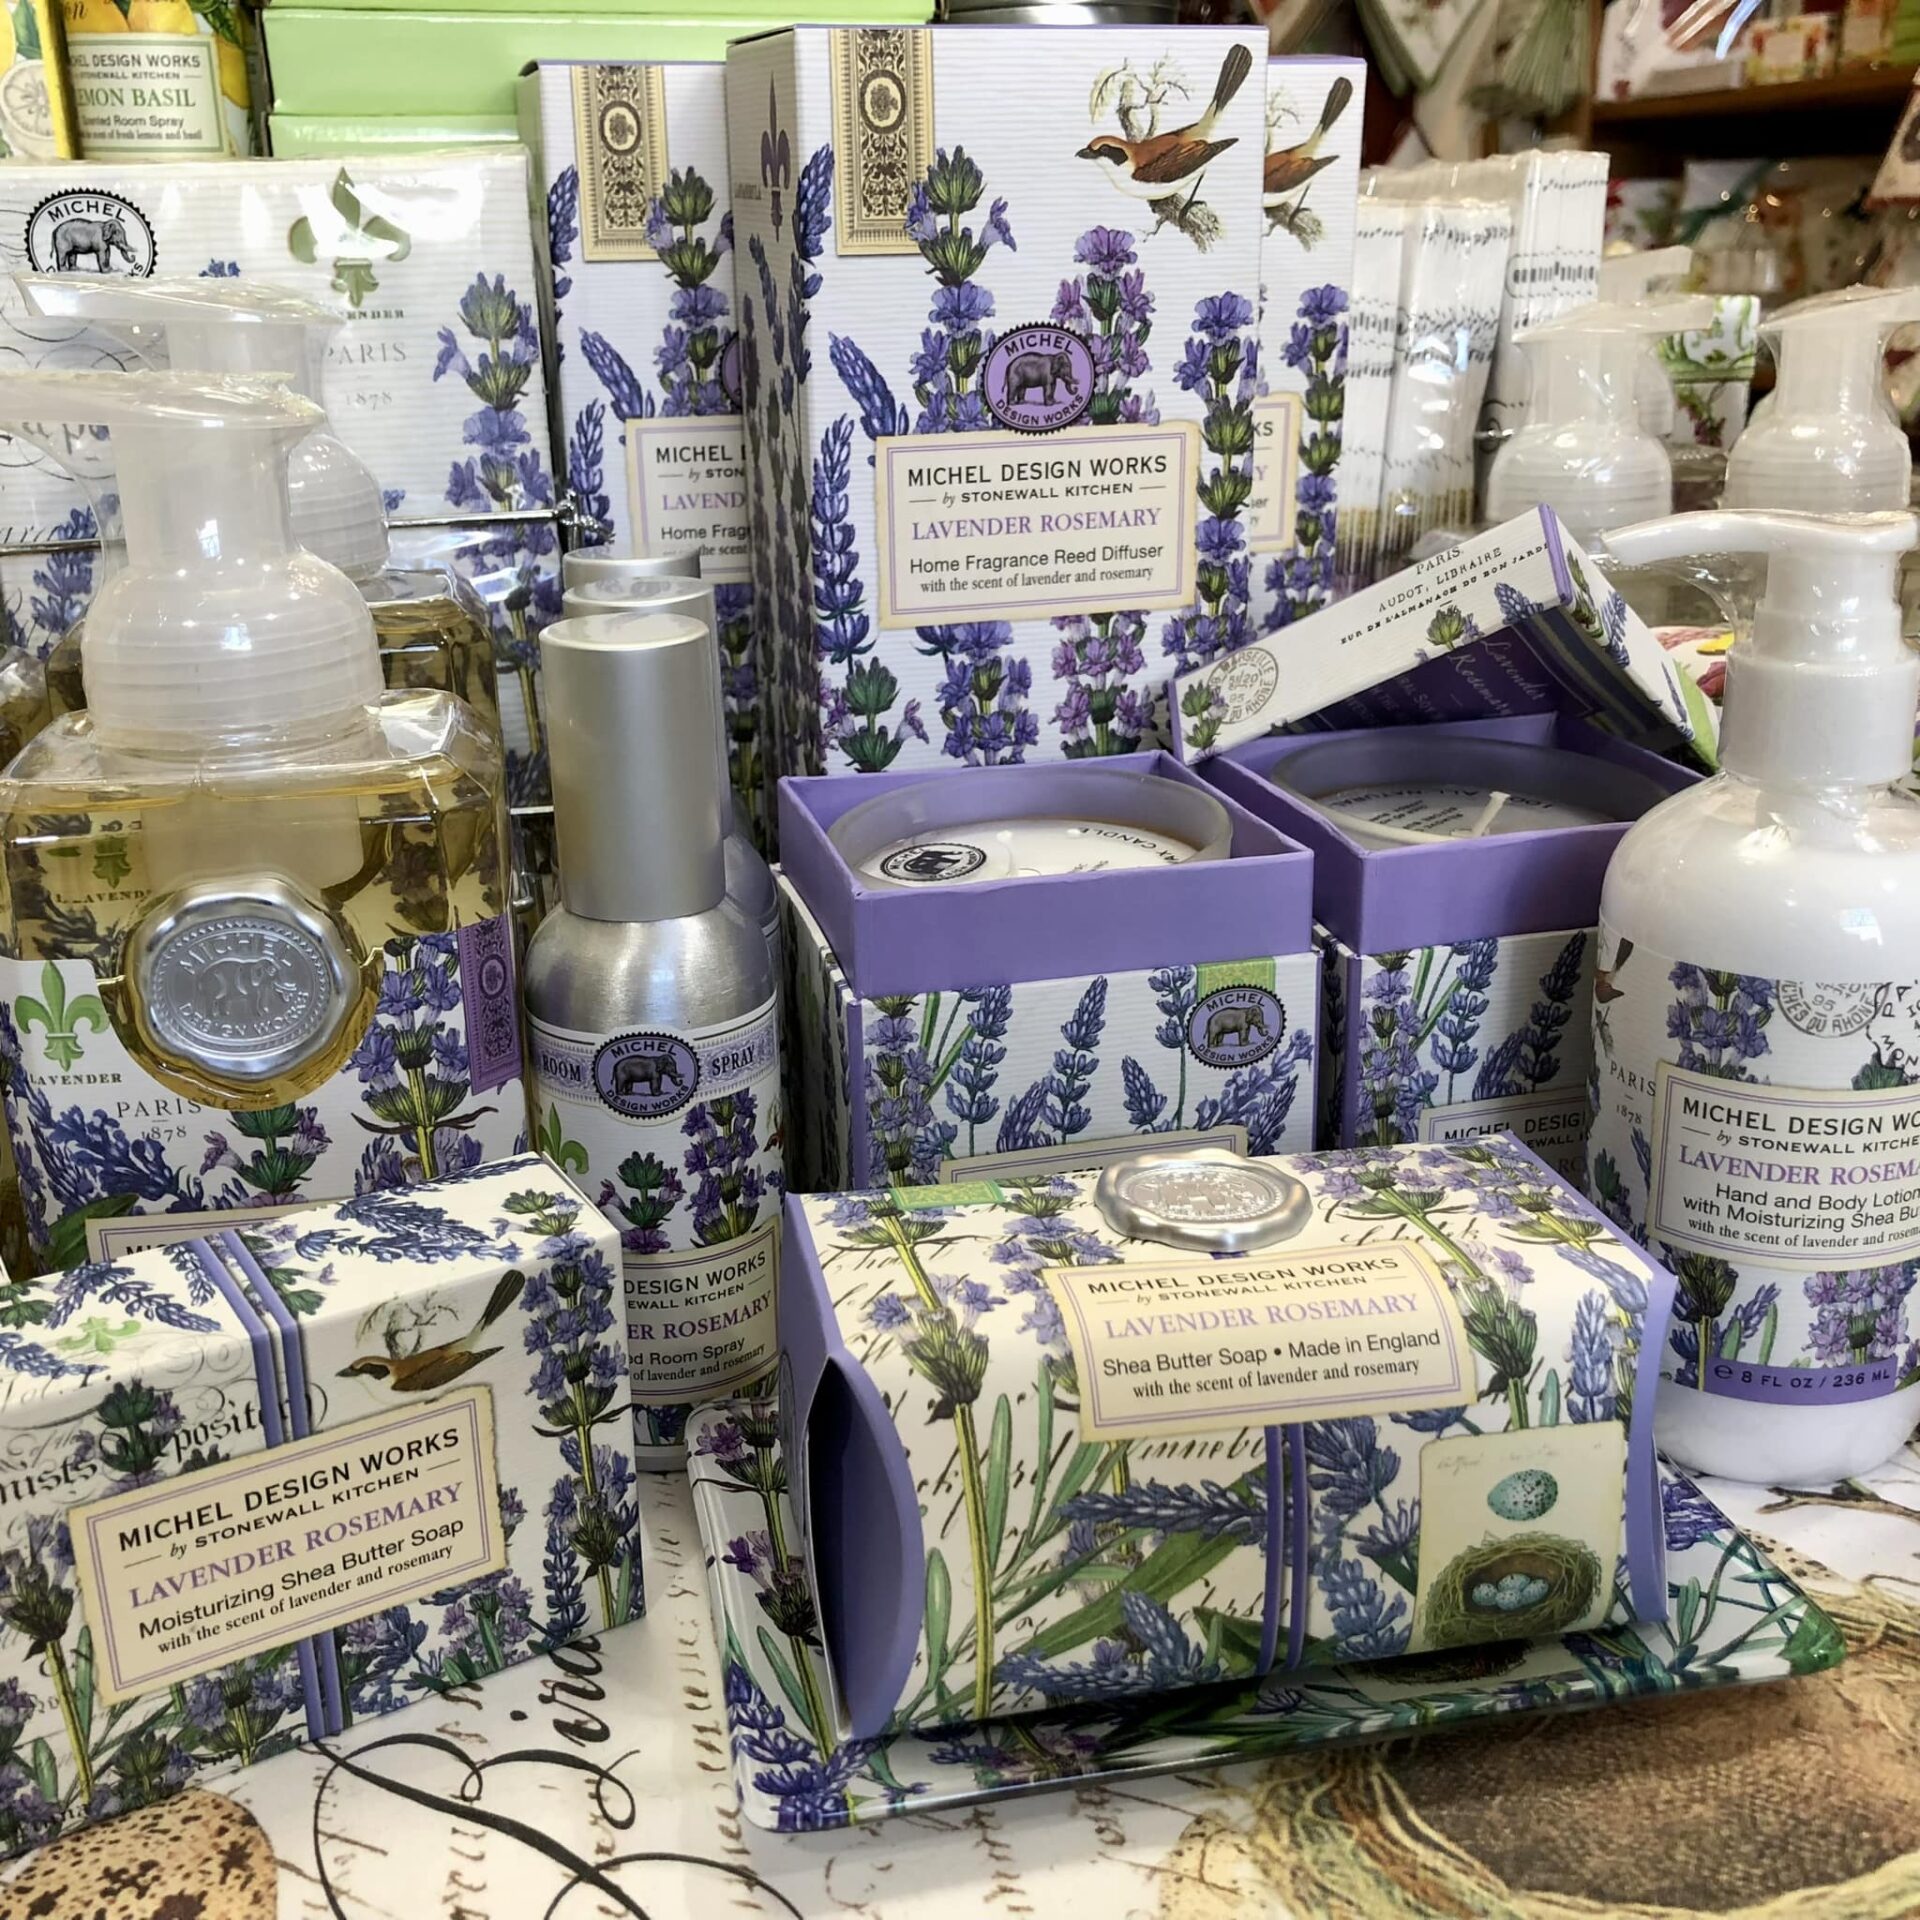 The Backyard Naturalist has Michel Design Work's soaps, lotions, candles and room sprays in a range of scents, including Lavender Rosemary.